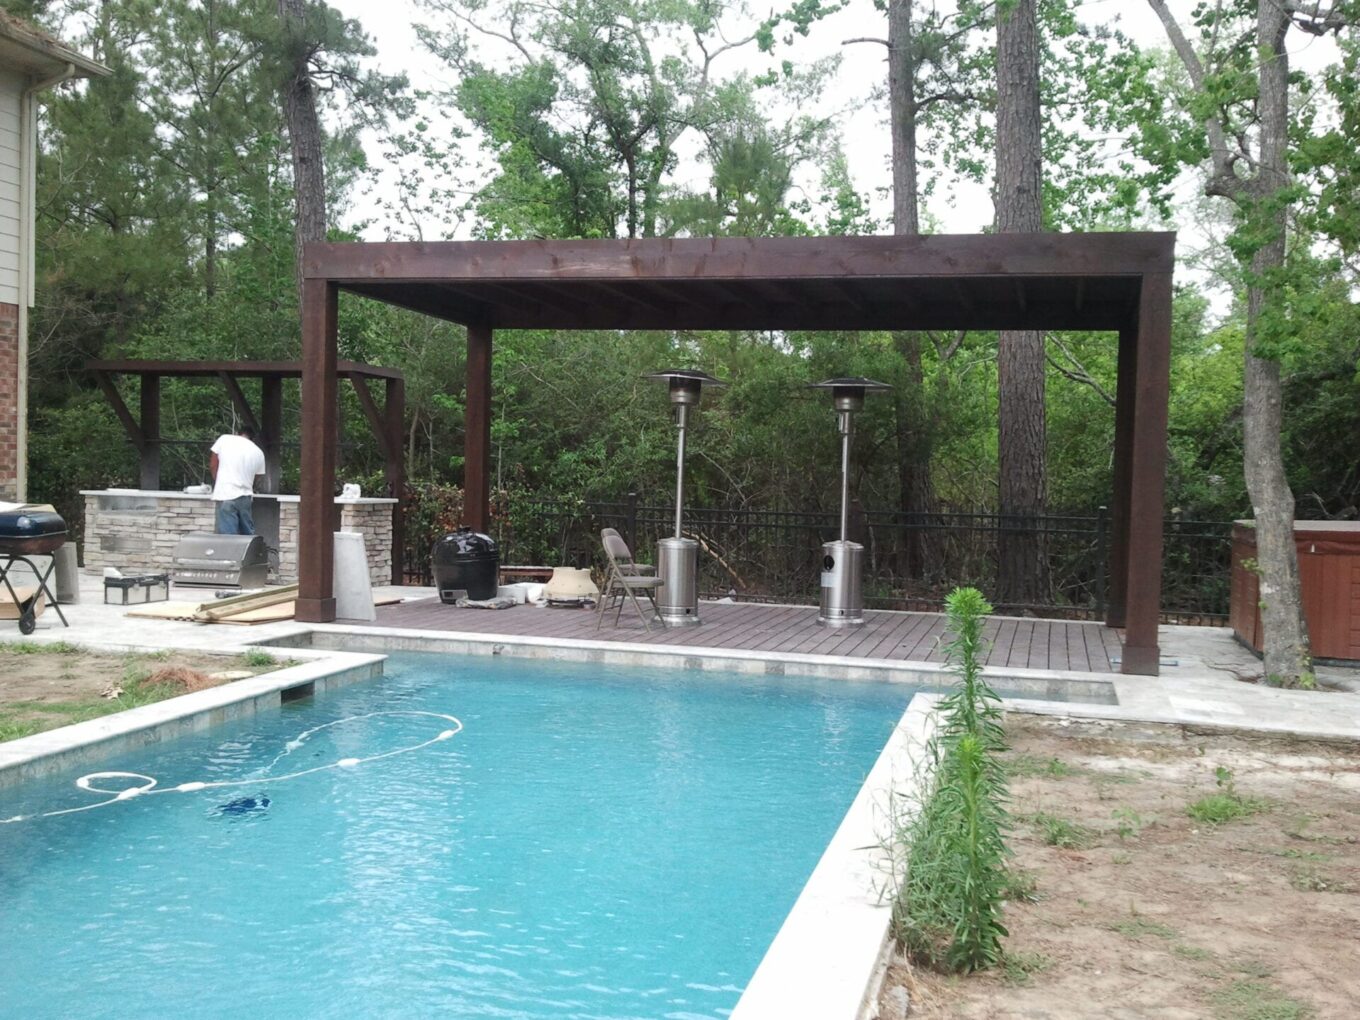 A pool with a wooden structure in the middle of it